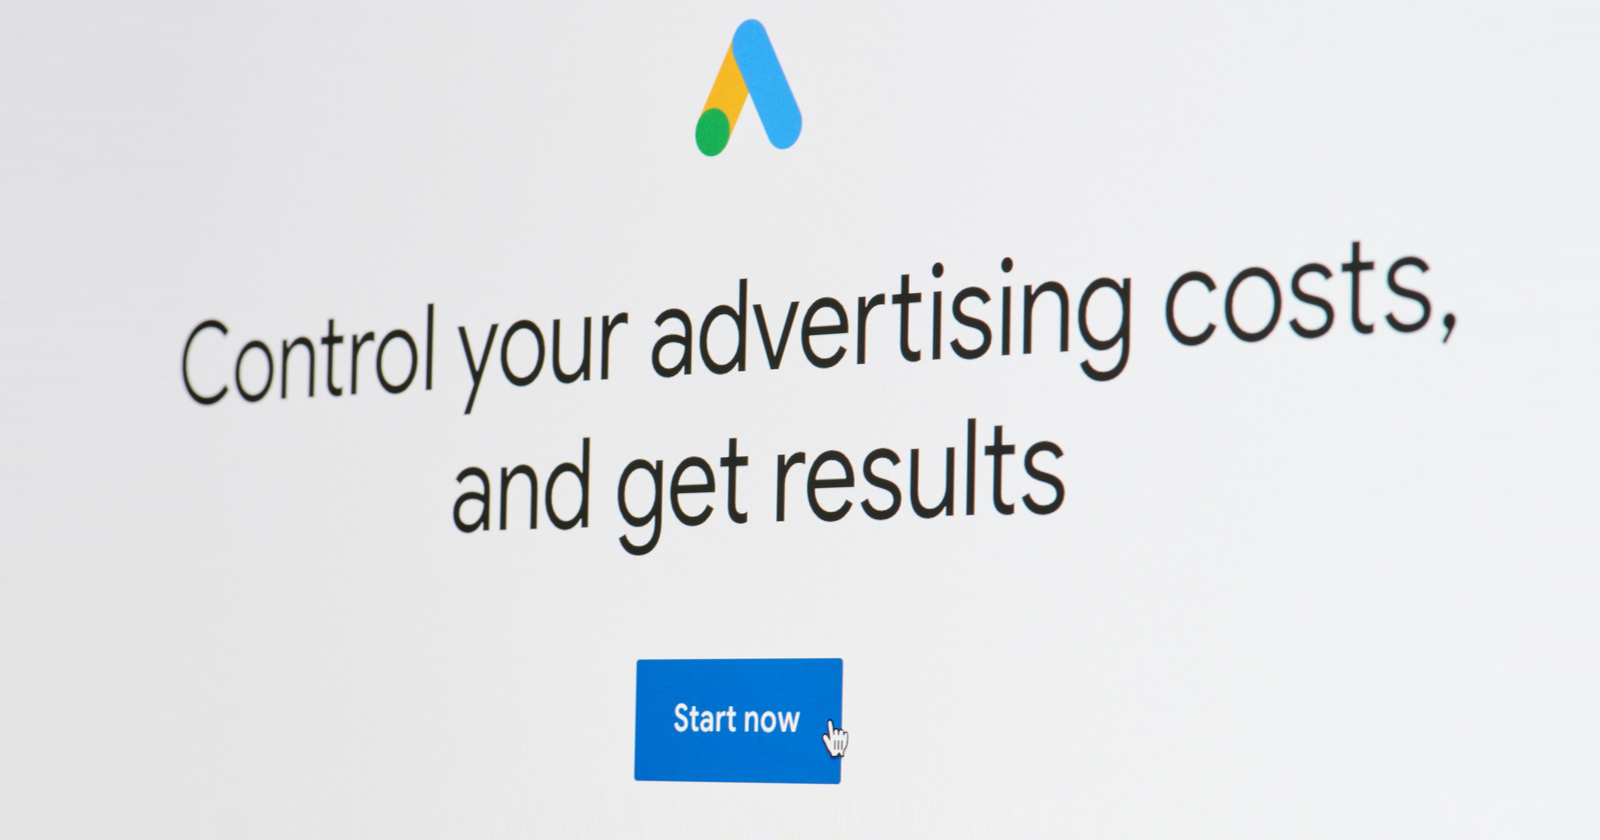 How does google ads provide control